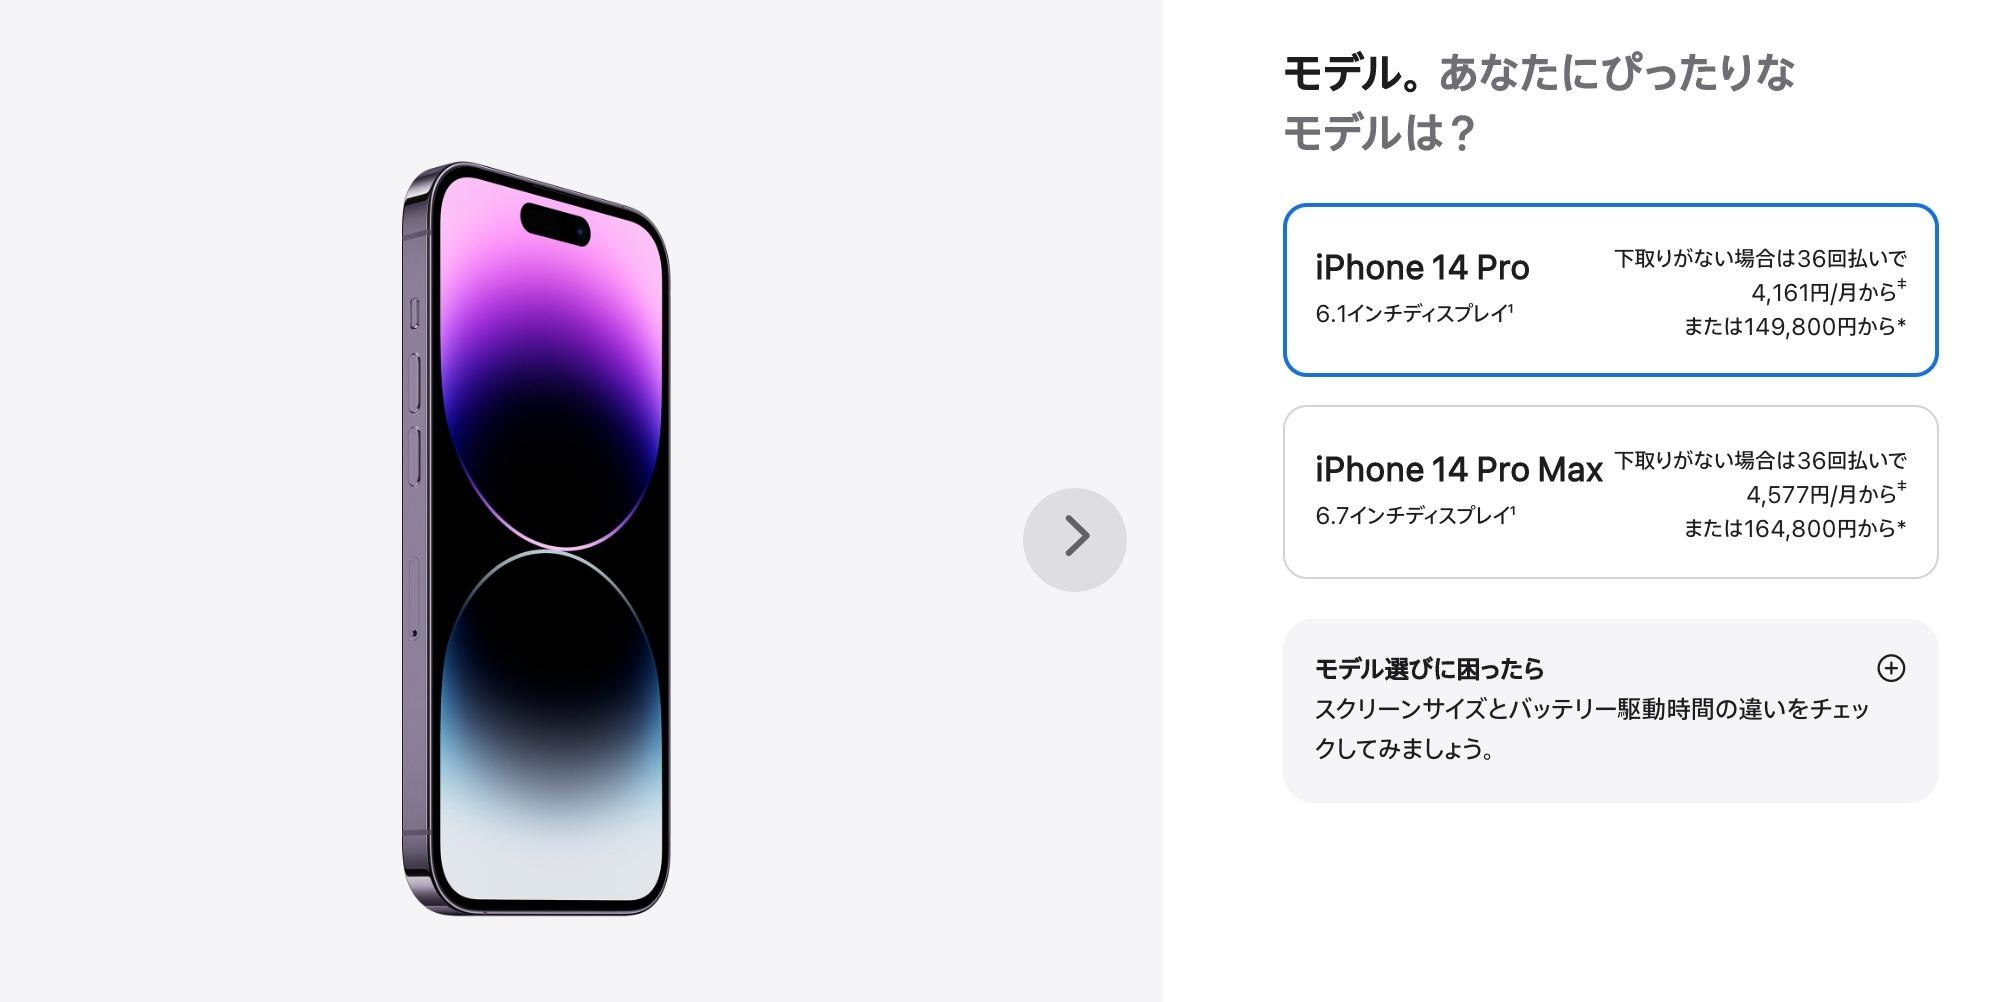 iPhone 14、Apple Watch、 AirPods Pro。本日発表されたアイテムの日本 